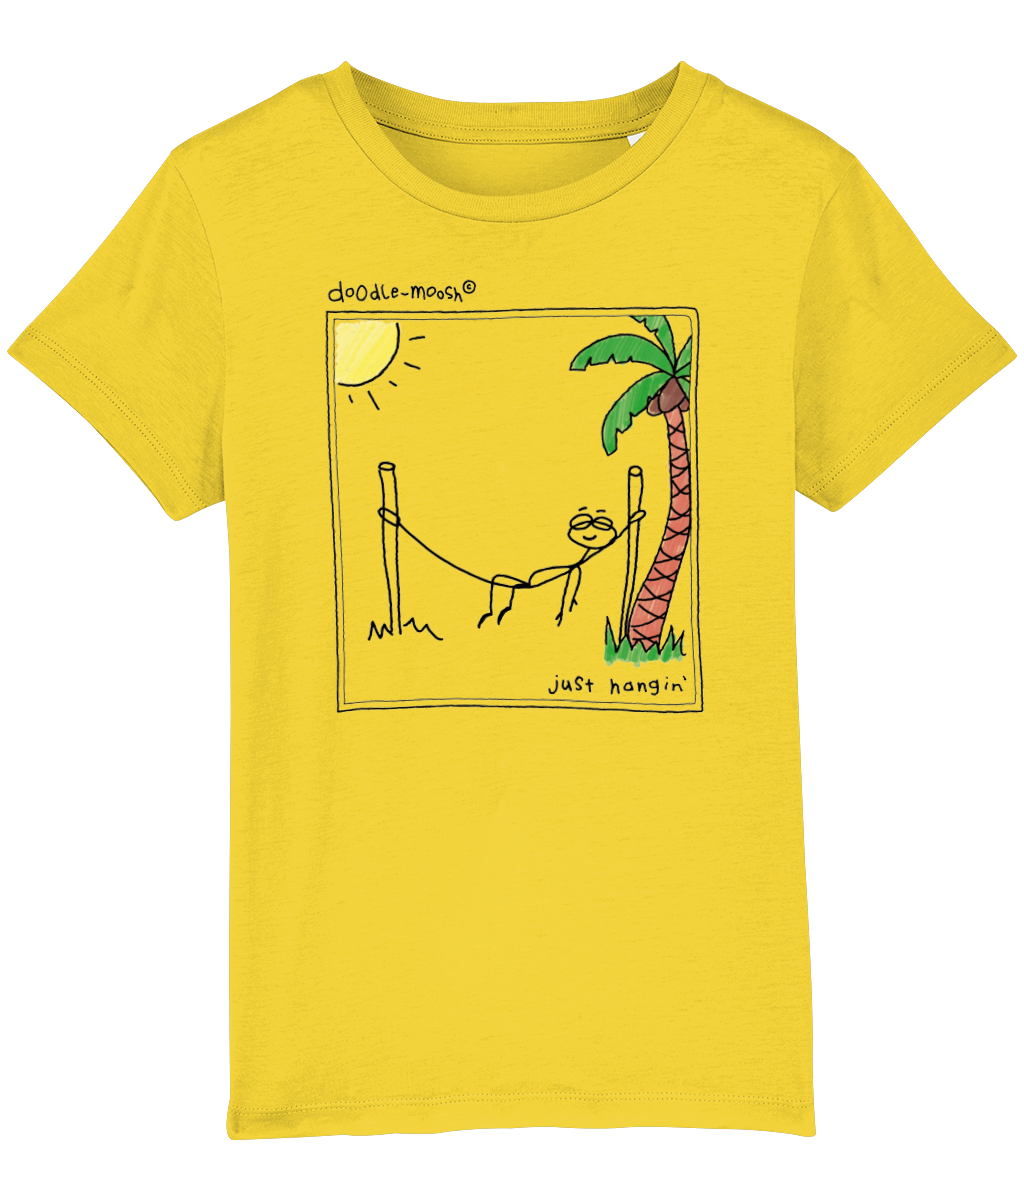 Just hanging t-shirt, yellow with black, colourful drawing